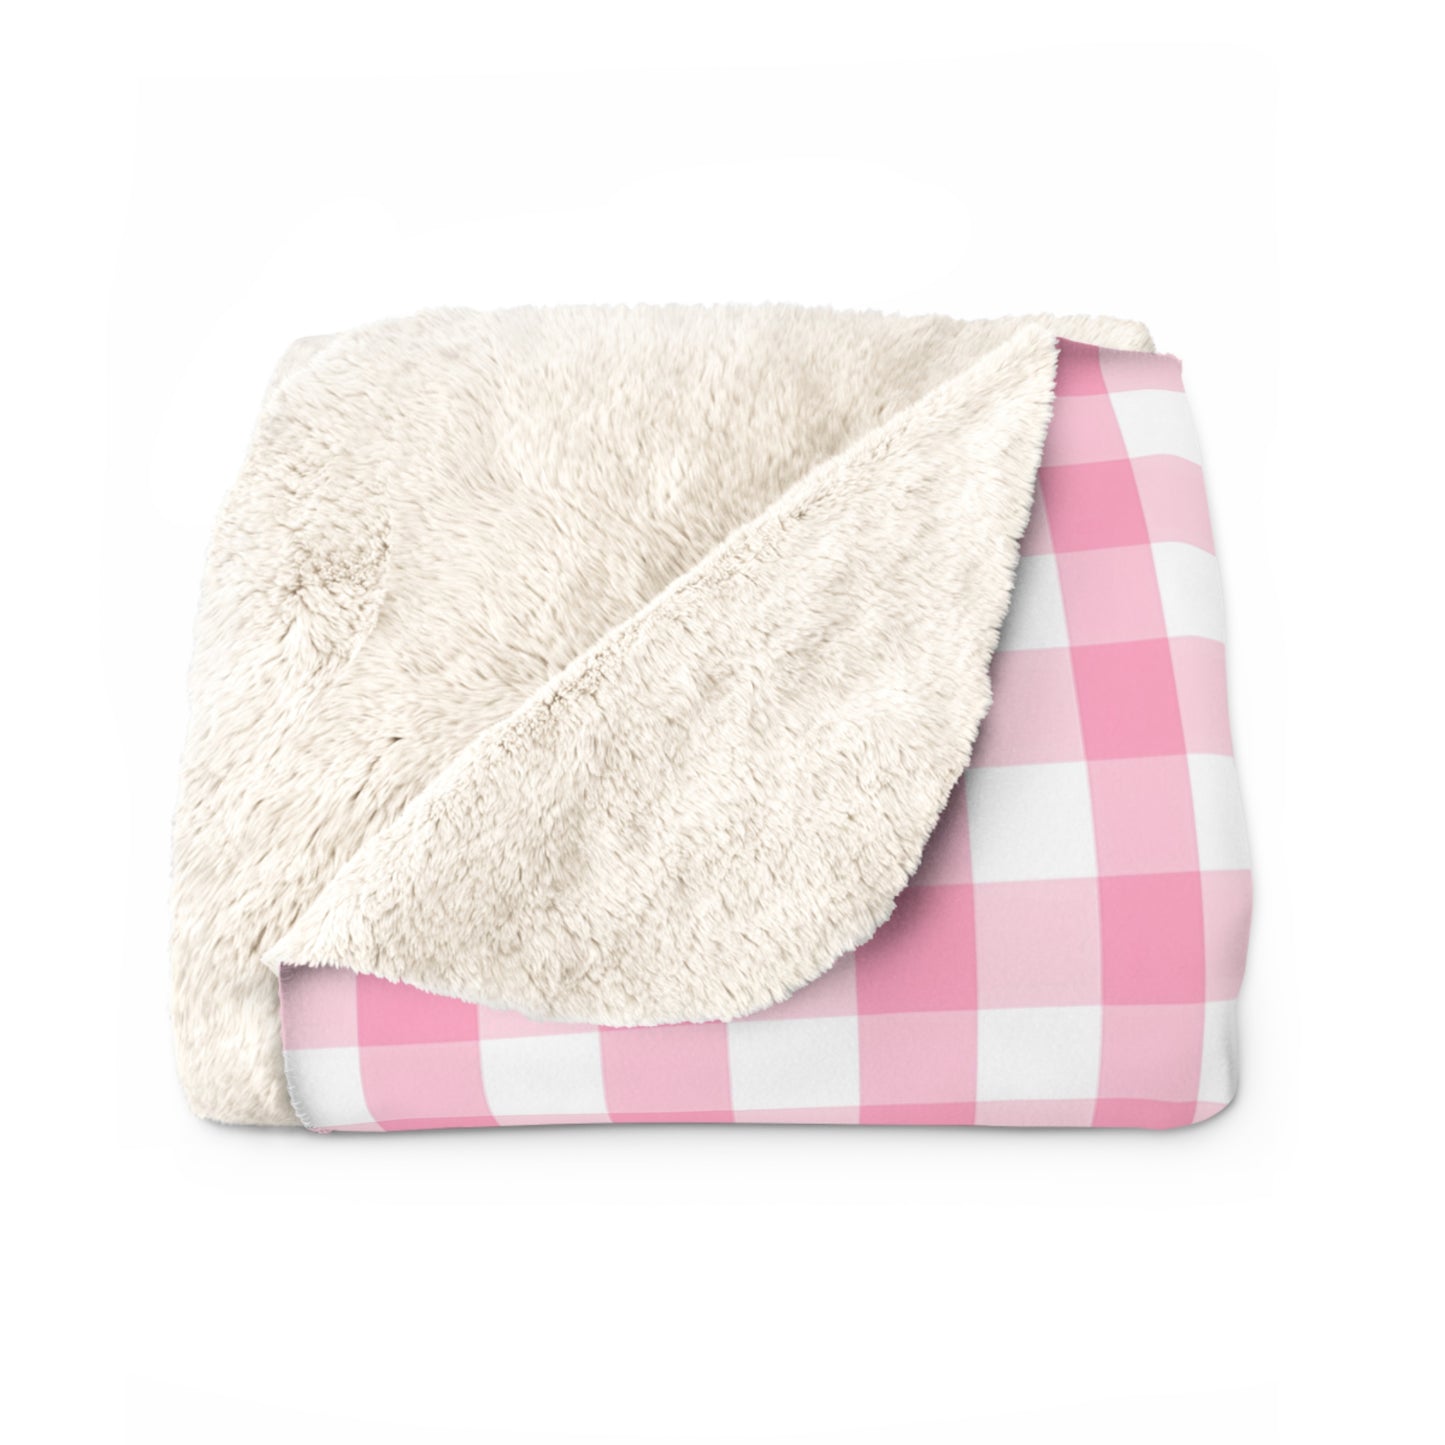 Pour Yourself A Cup of Ambition Sherpa Fleece Blanket